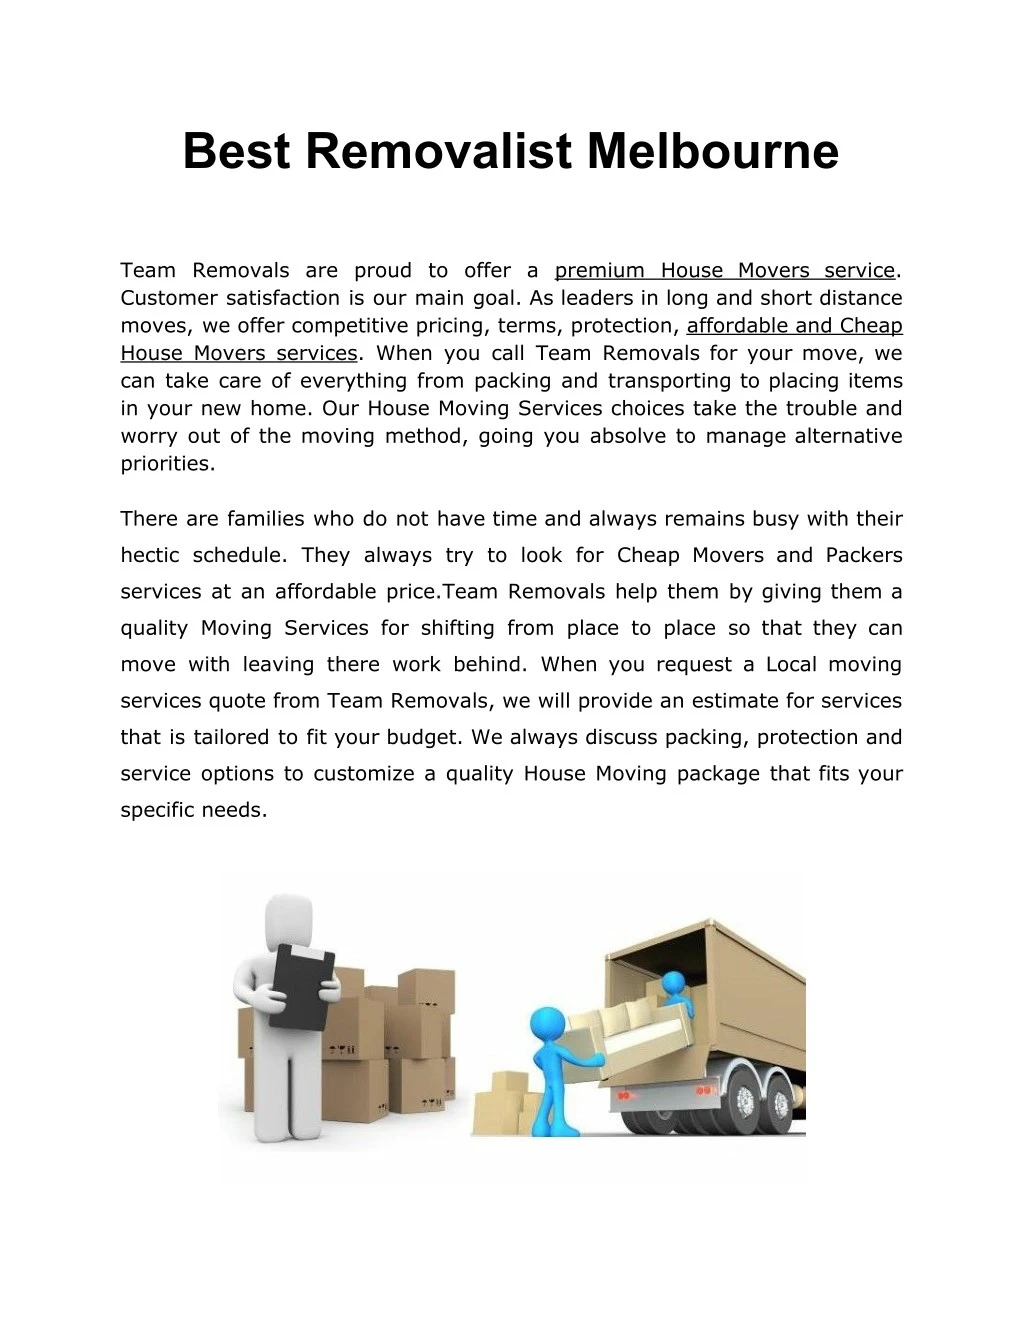 best removalist melbourne team removals are proud